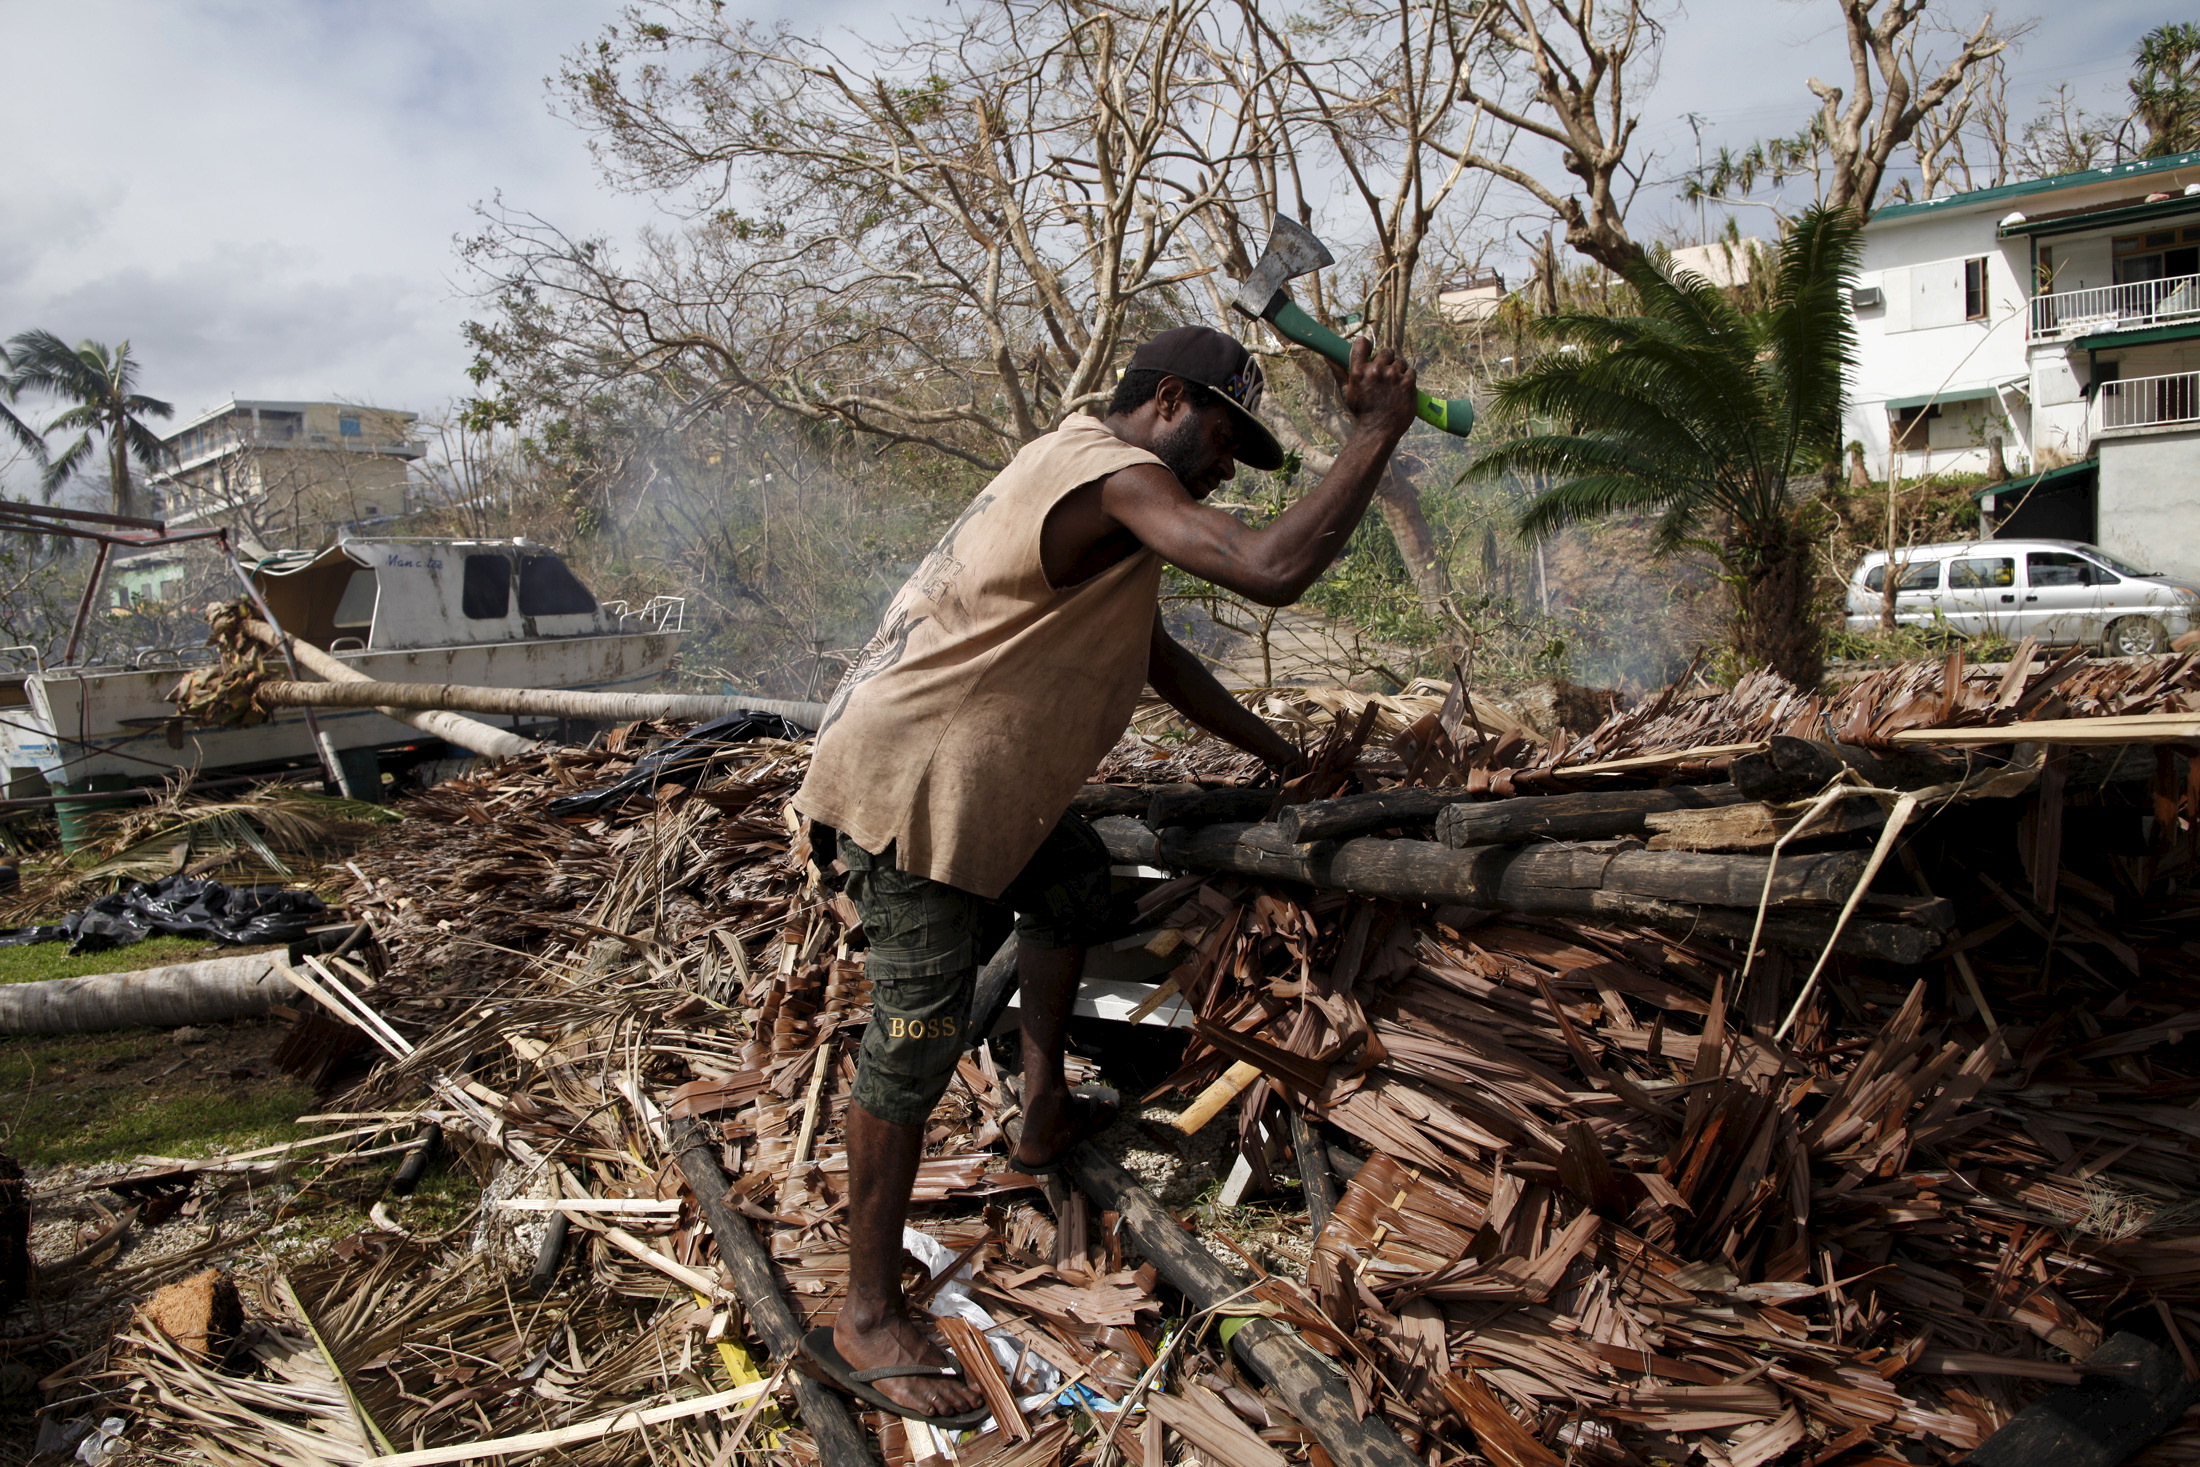 A worker chops up fallen trees next to a destroyed boat at a resident's compound days after Cyclone Pam in Port Vila, capital city of the Pacific island nation of Vanuatu March 19, 2015. (Edgar Su—Reuters)